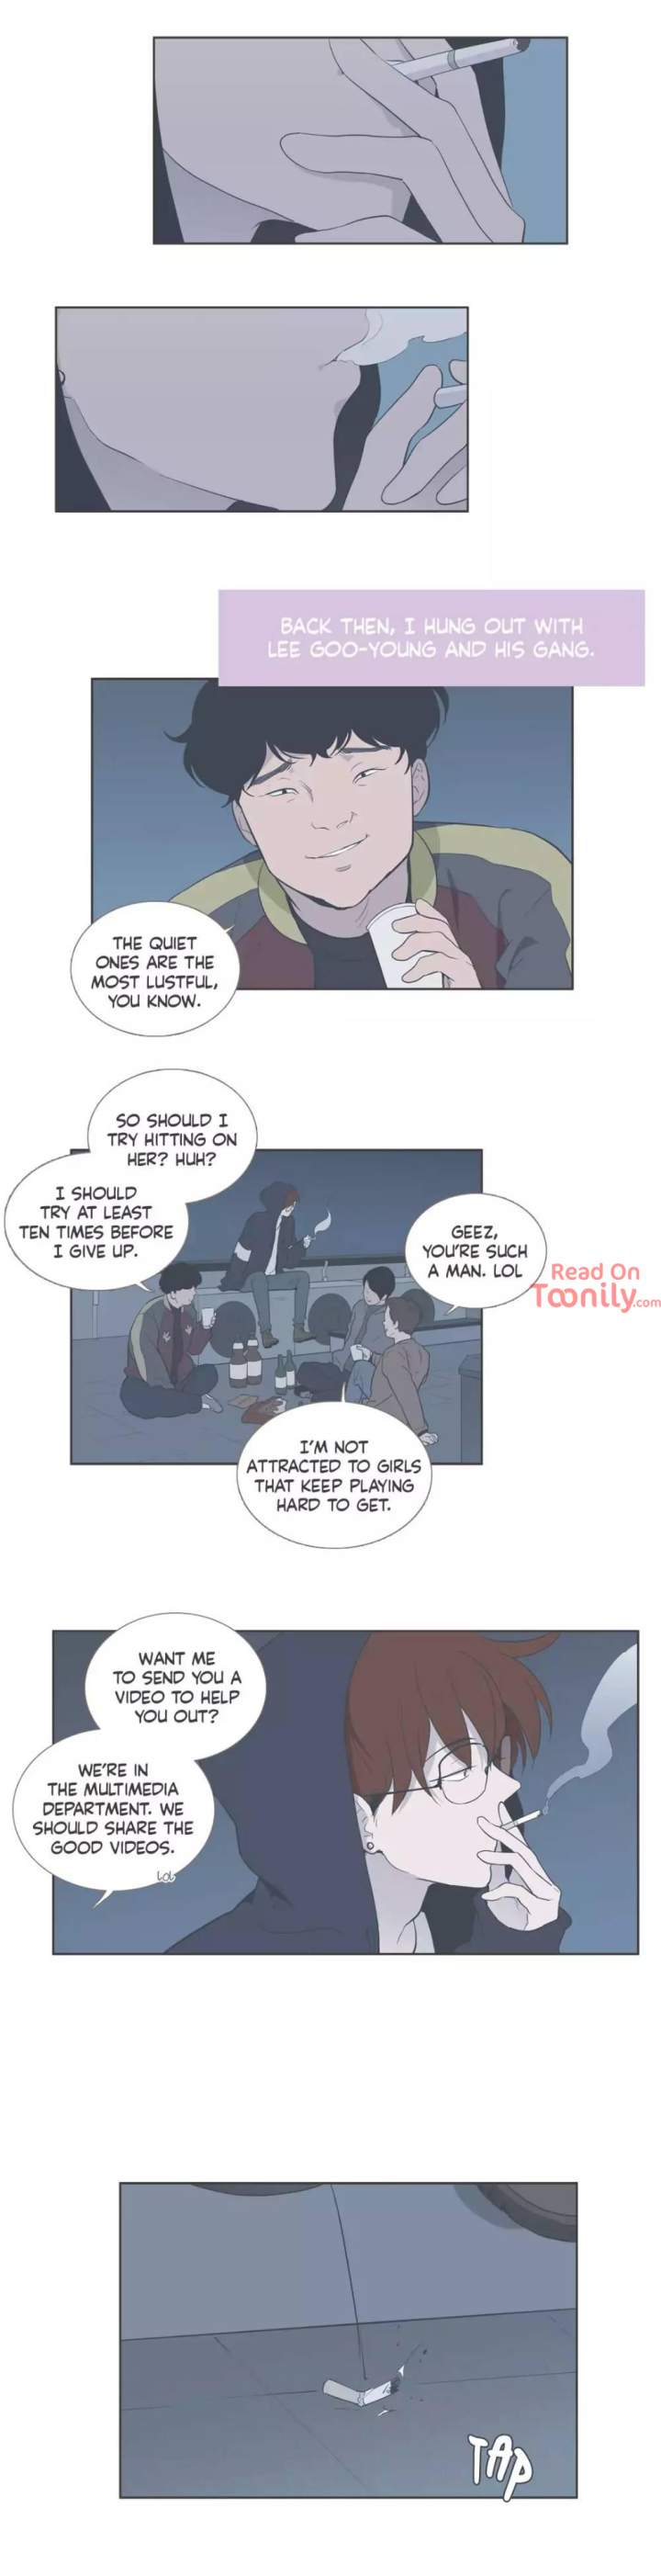 Something About Us - Chapter 99 Page 2